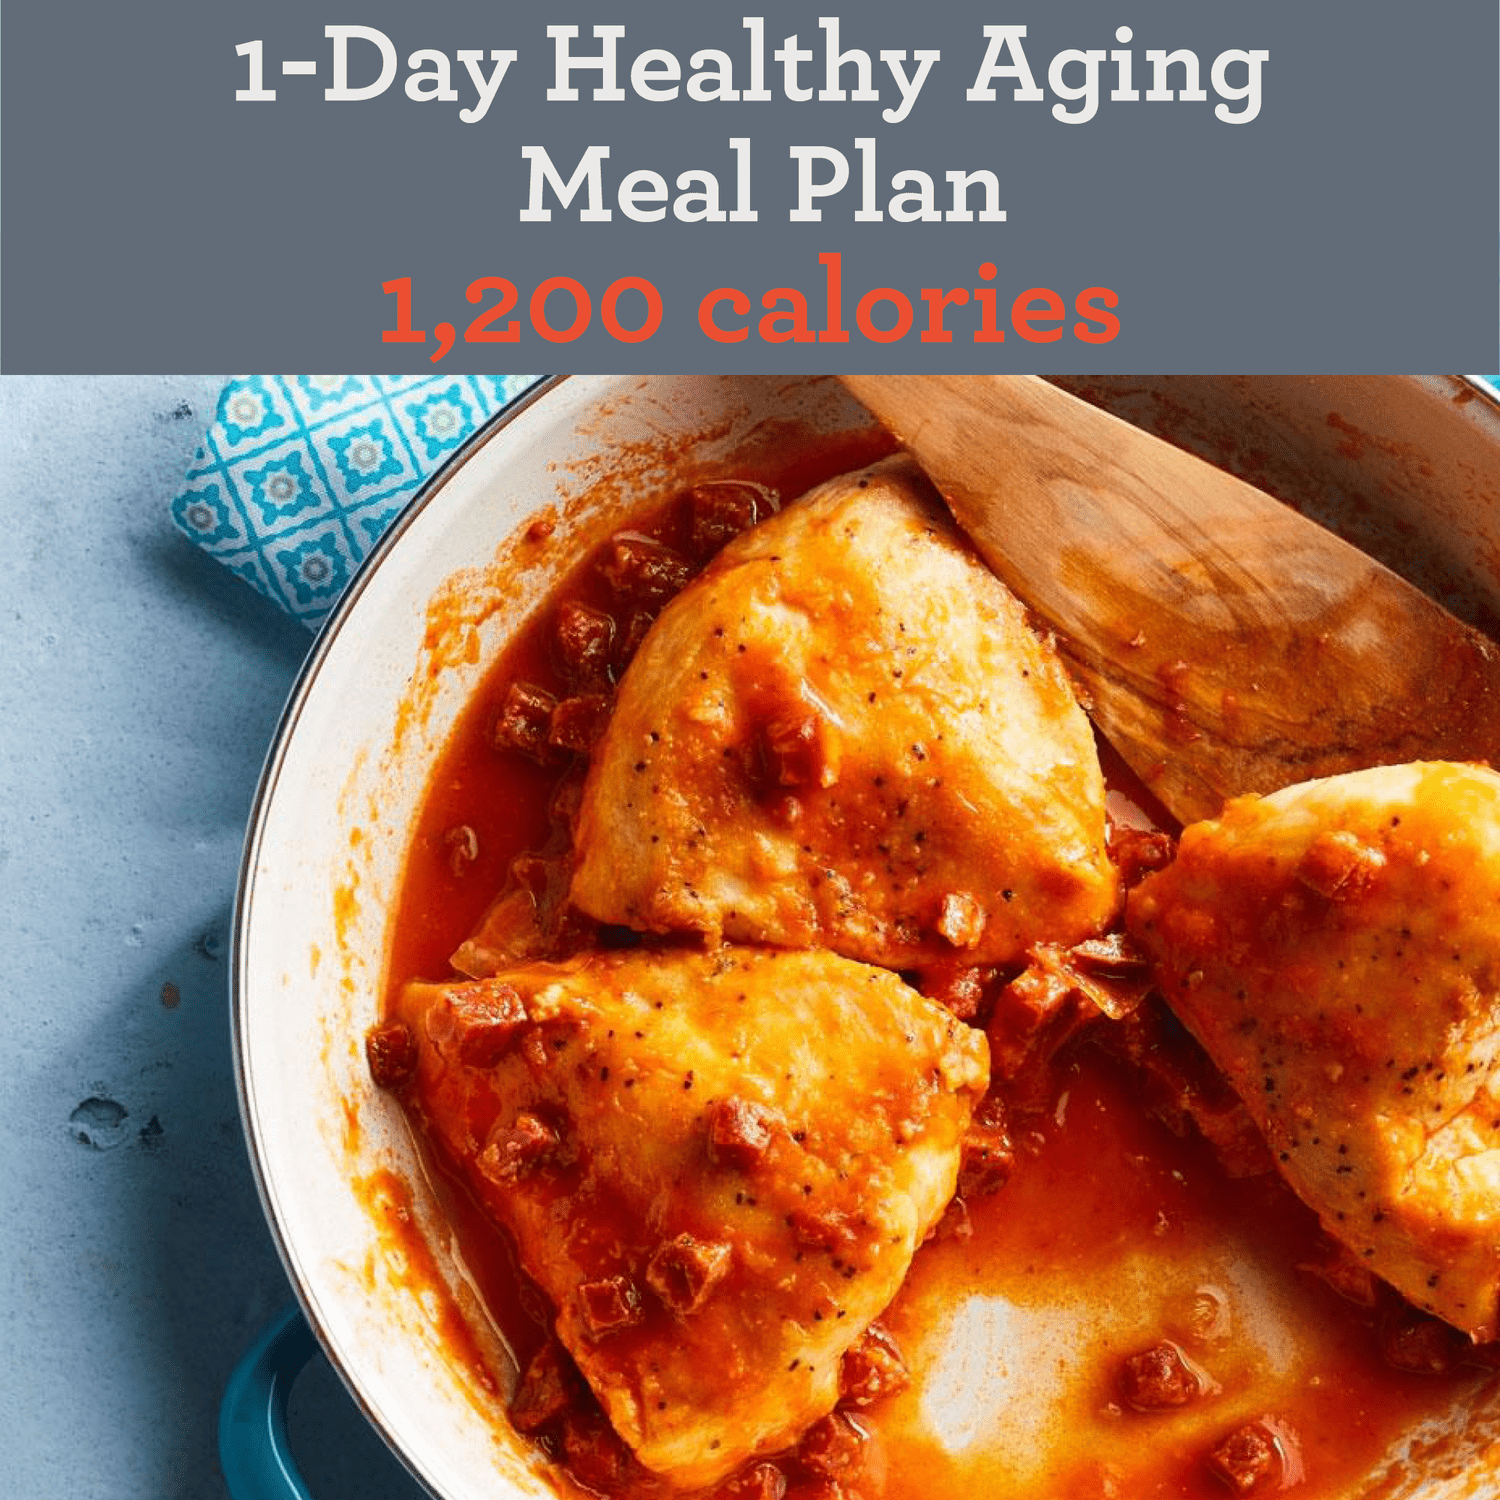 1-Day Healthy-Aging Meal Plan: 1,200 calories